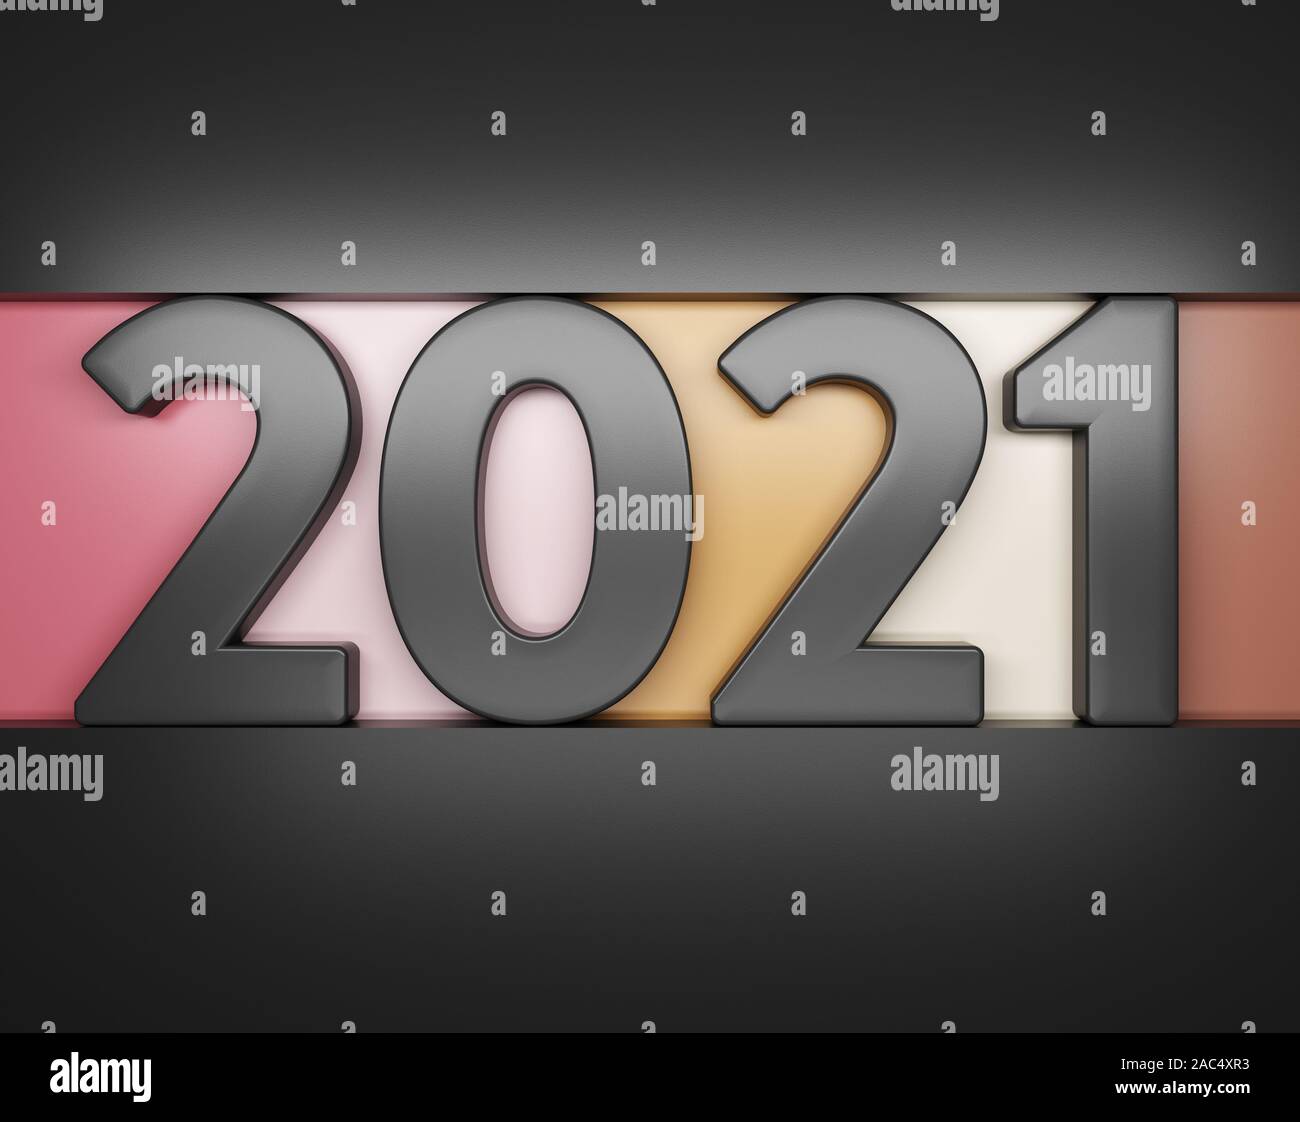 New Year 2021 Creative Design Concept - 3D Rendered Image Stock Photo